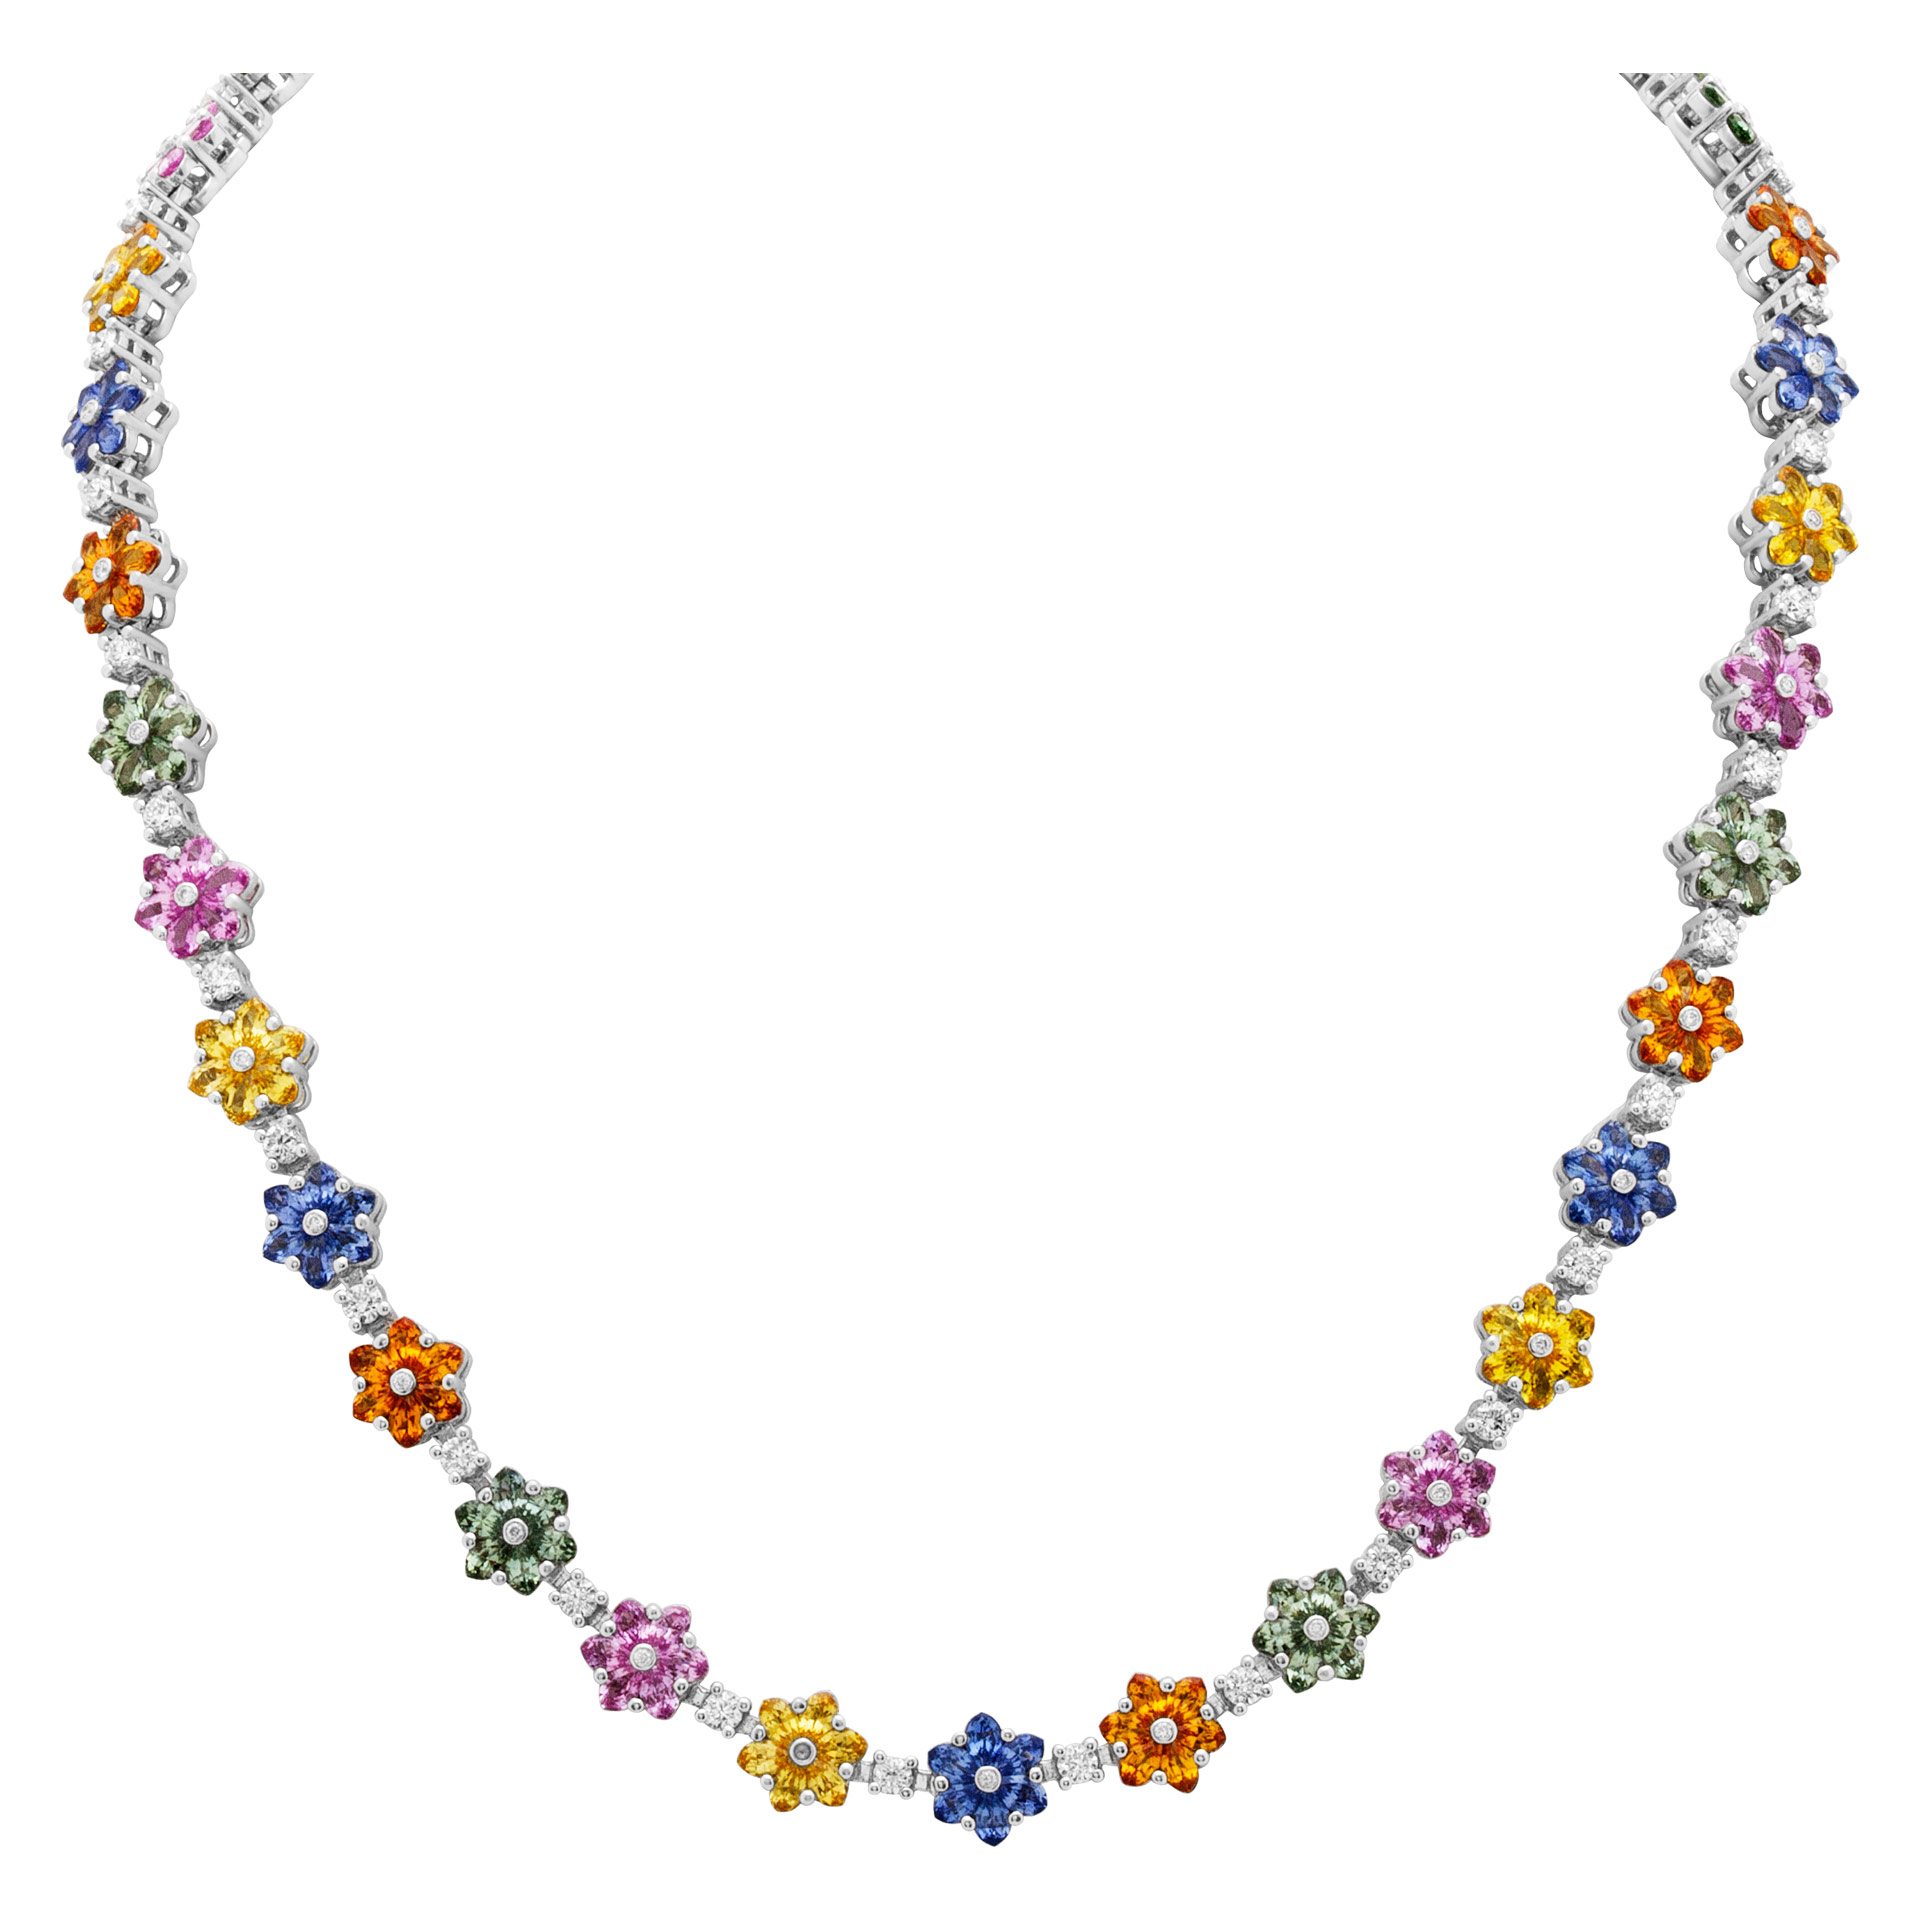 Multi-color Sapphire flower necklace in 18k white gold, 23.04 carats in sapphires 2.49 cts diamonds